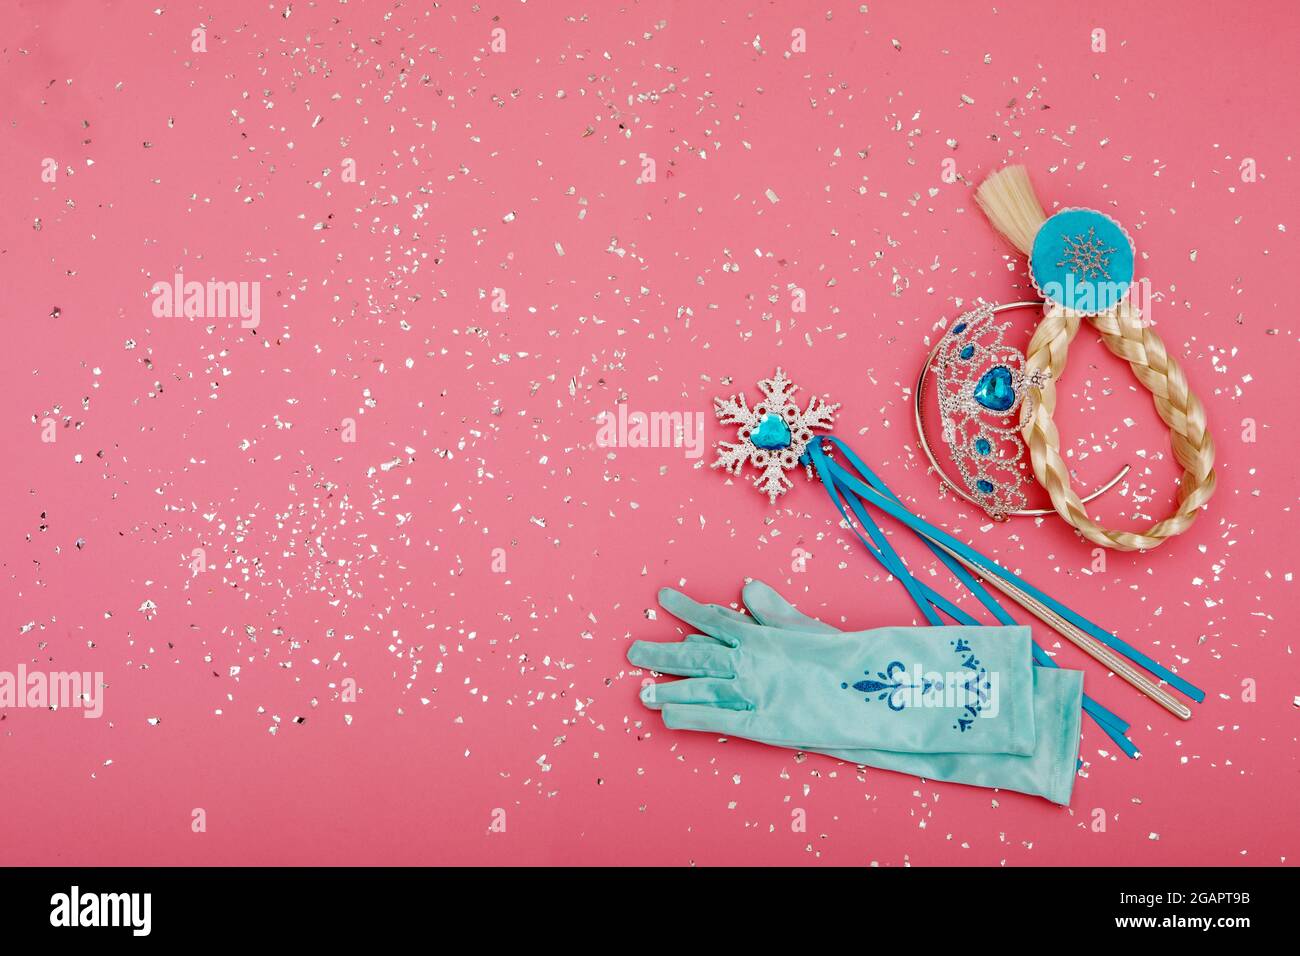 From above of magic wand and gloves placed near crown and pigtail on pink background with silver glitter Stock Photo